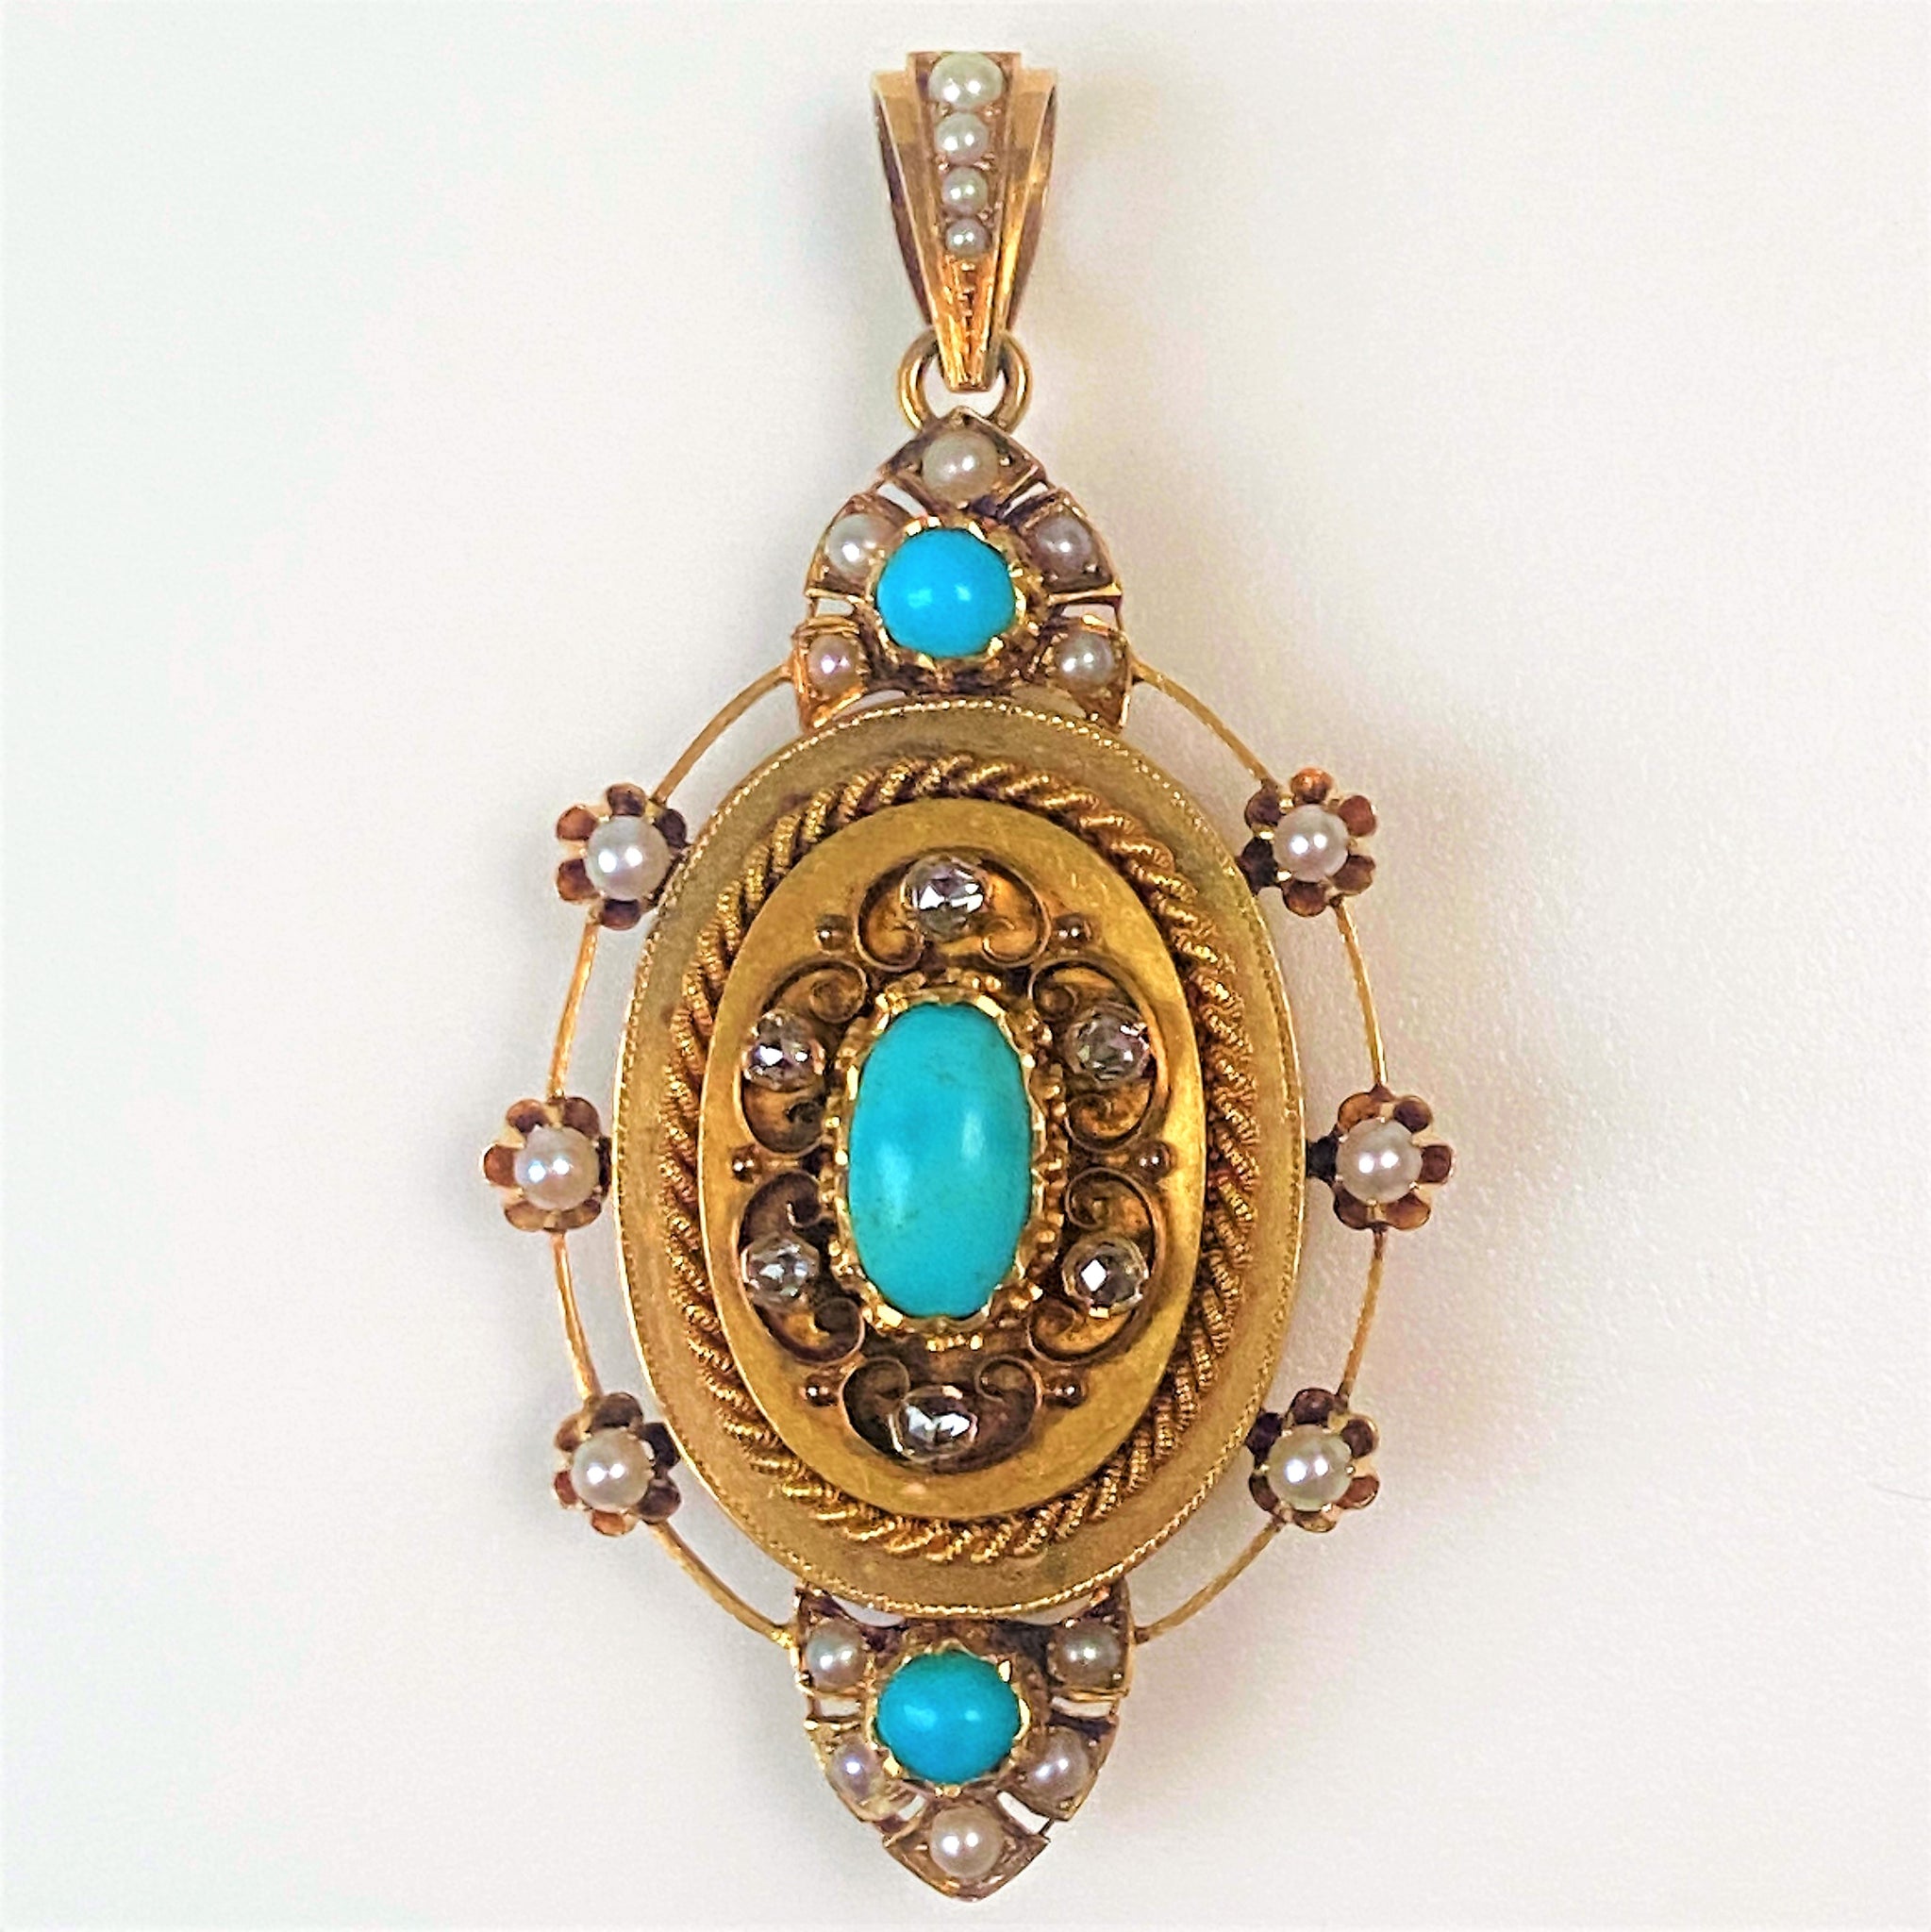 Antique 18ct Gold, Diamond, Pearl and Turquoise Locket